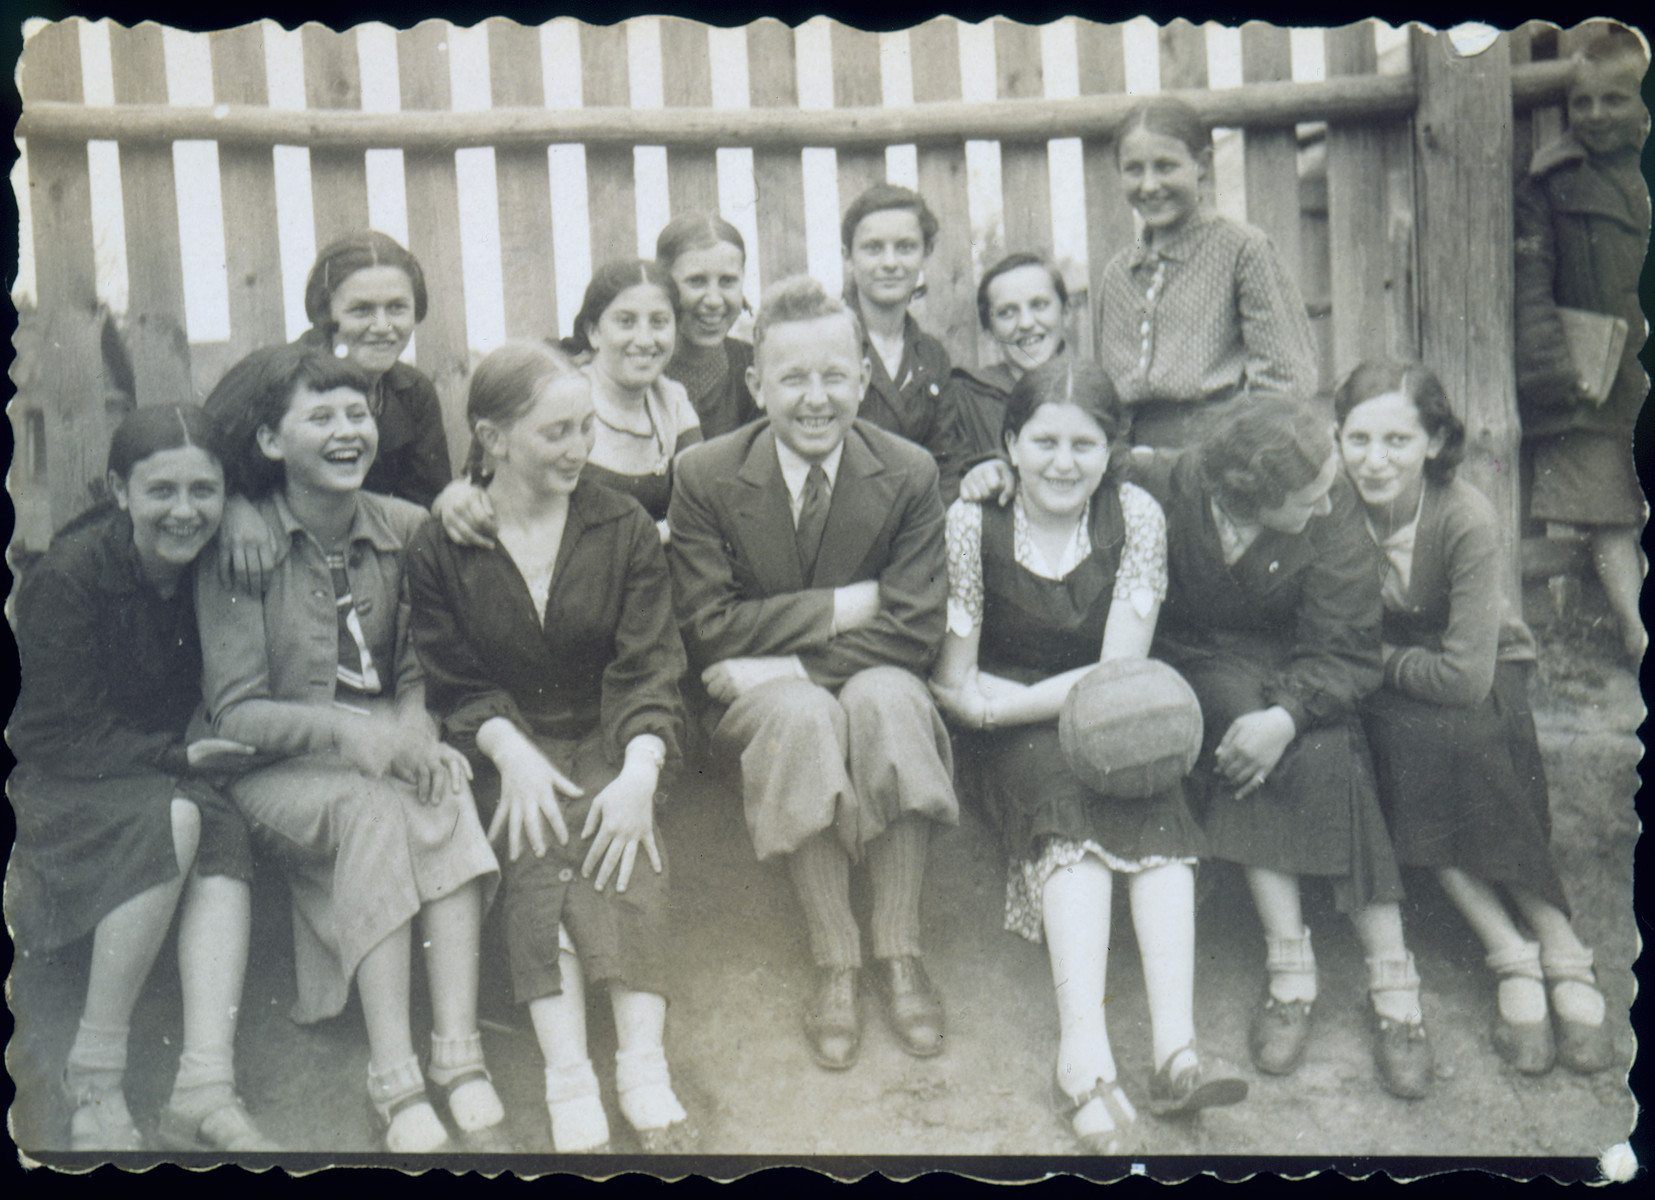 Group portrait of students in a physical education class at a Polish secondary school.  

Among those pictured are: Chaya Szepsenwol (front row holding a volleyball); Fejga Szepsenwol (back row, second from the left); and Gala Rogovin (front row, third from the left).